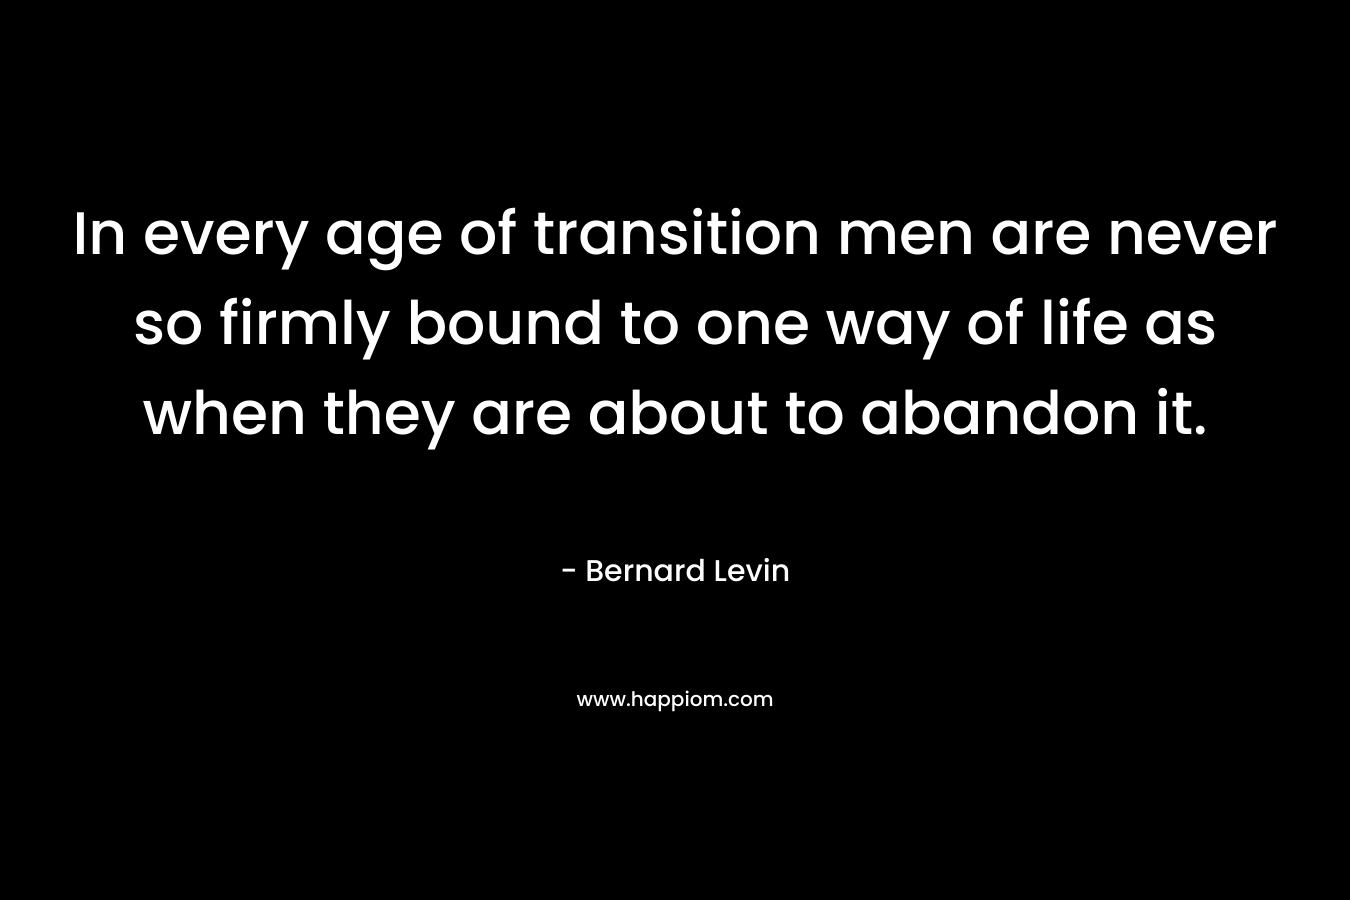 In every age of transition men are never so firmly bound to one way of life as when they are about to abandon it. – Bernard Levin